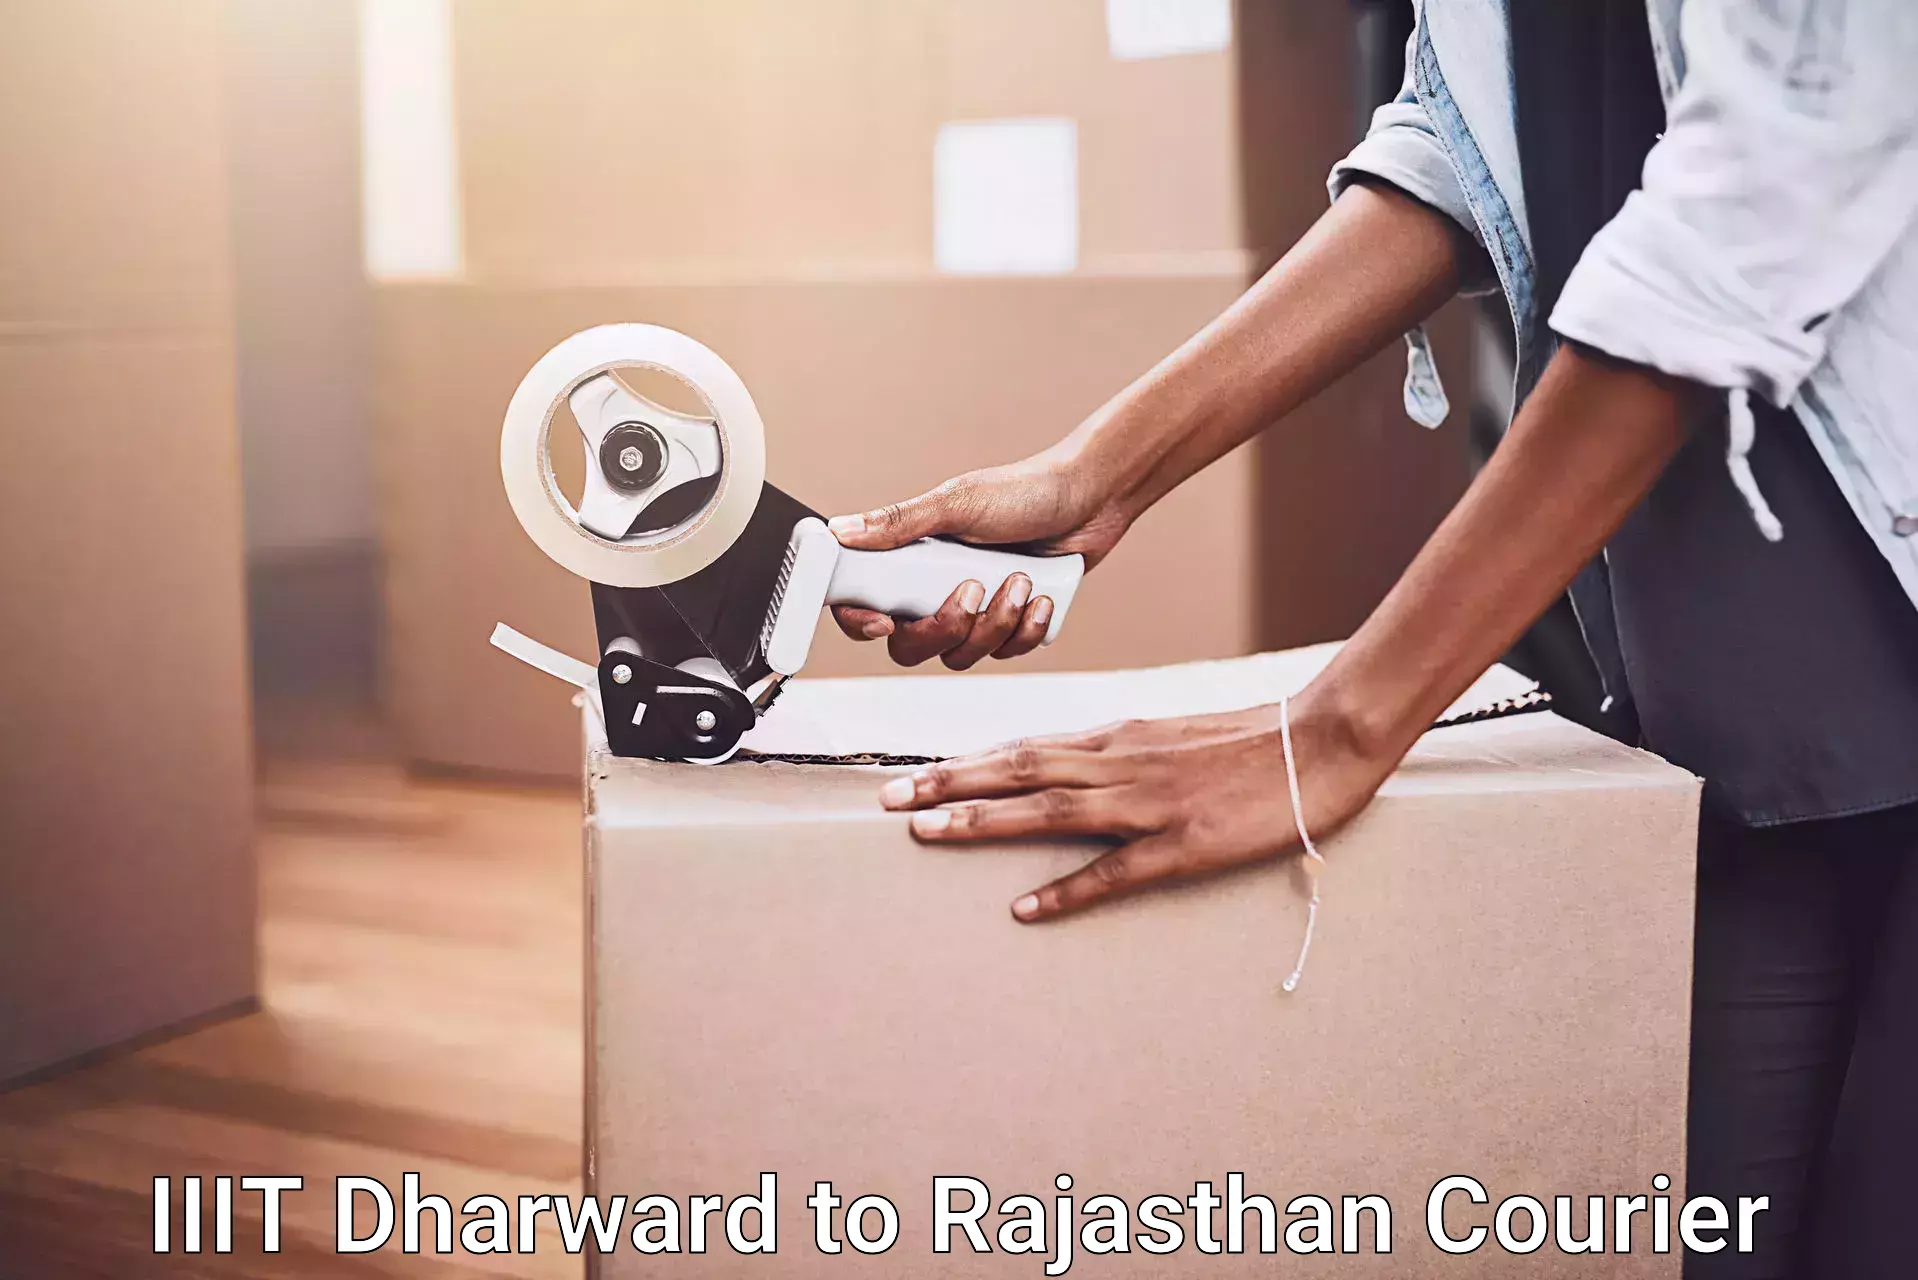 Home moving specialists IIIT Dharward to Rajasthan